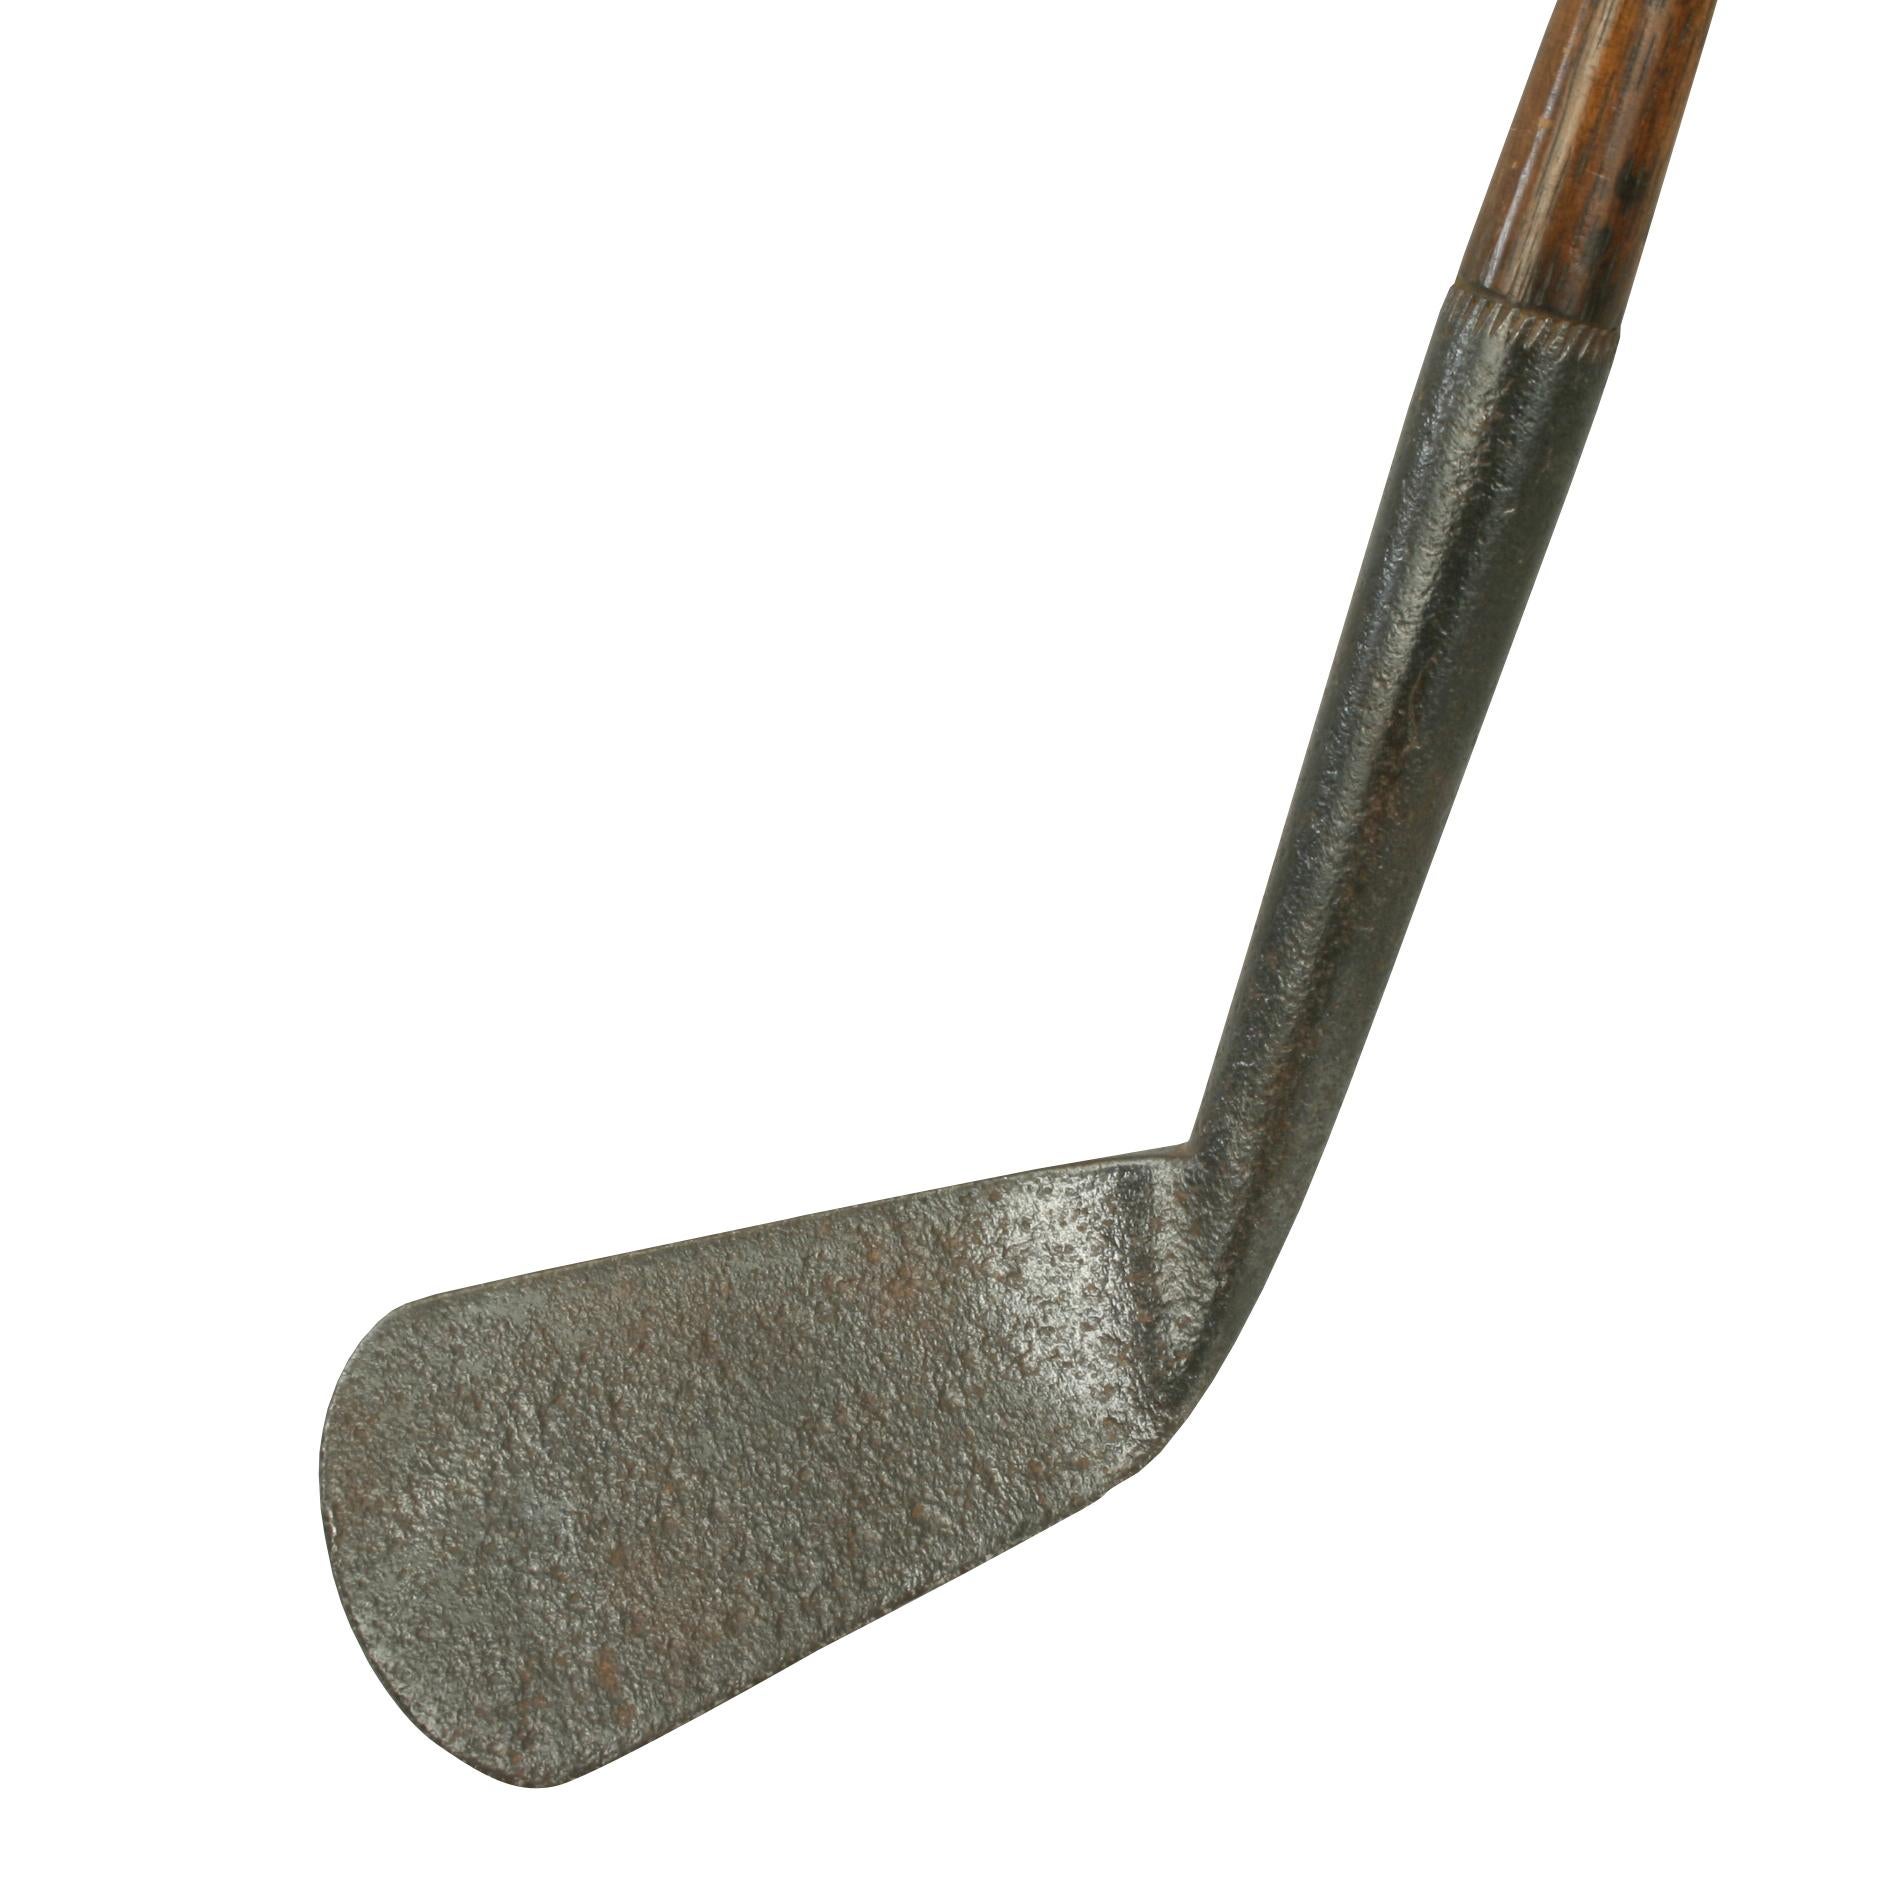 Vintage Hickory Shafted Golf Club, Iron.

An early large head, smooth face golf club, iron. The metal head is pitted but in very acceptable condition. The original hickory shaft with the initials 'AHLM' stamped below an unusual cork grip (intact